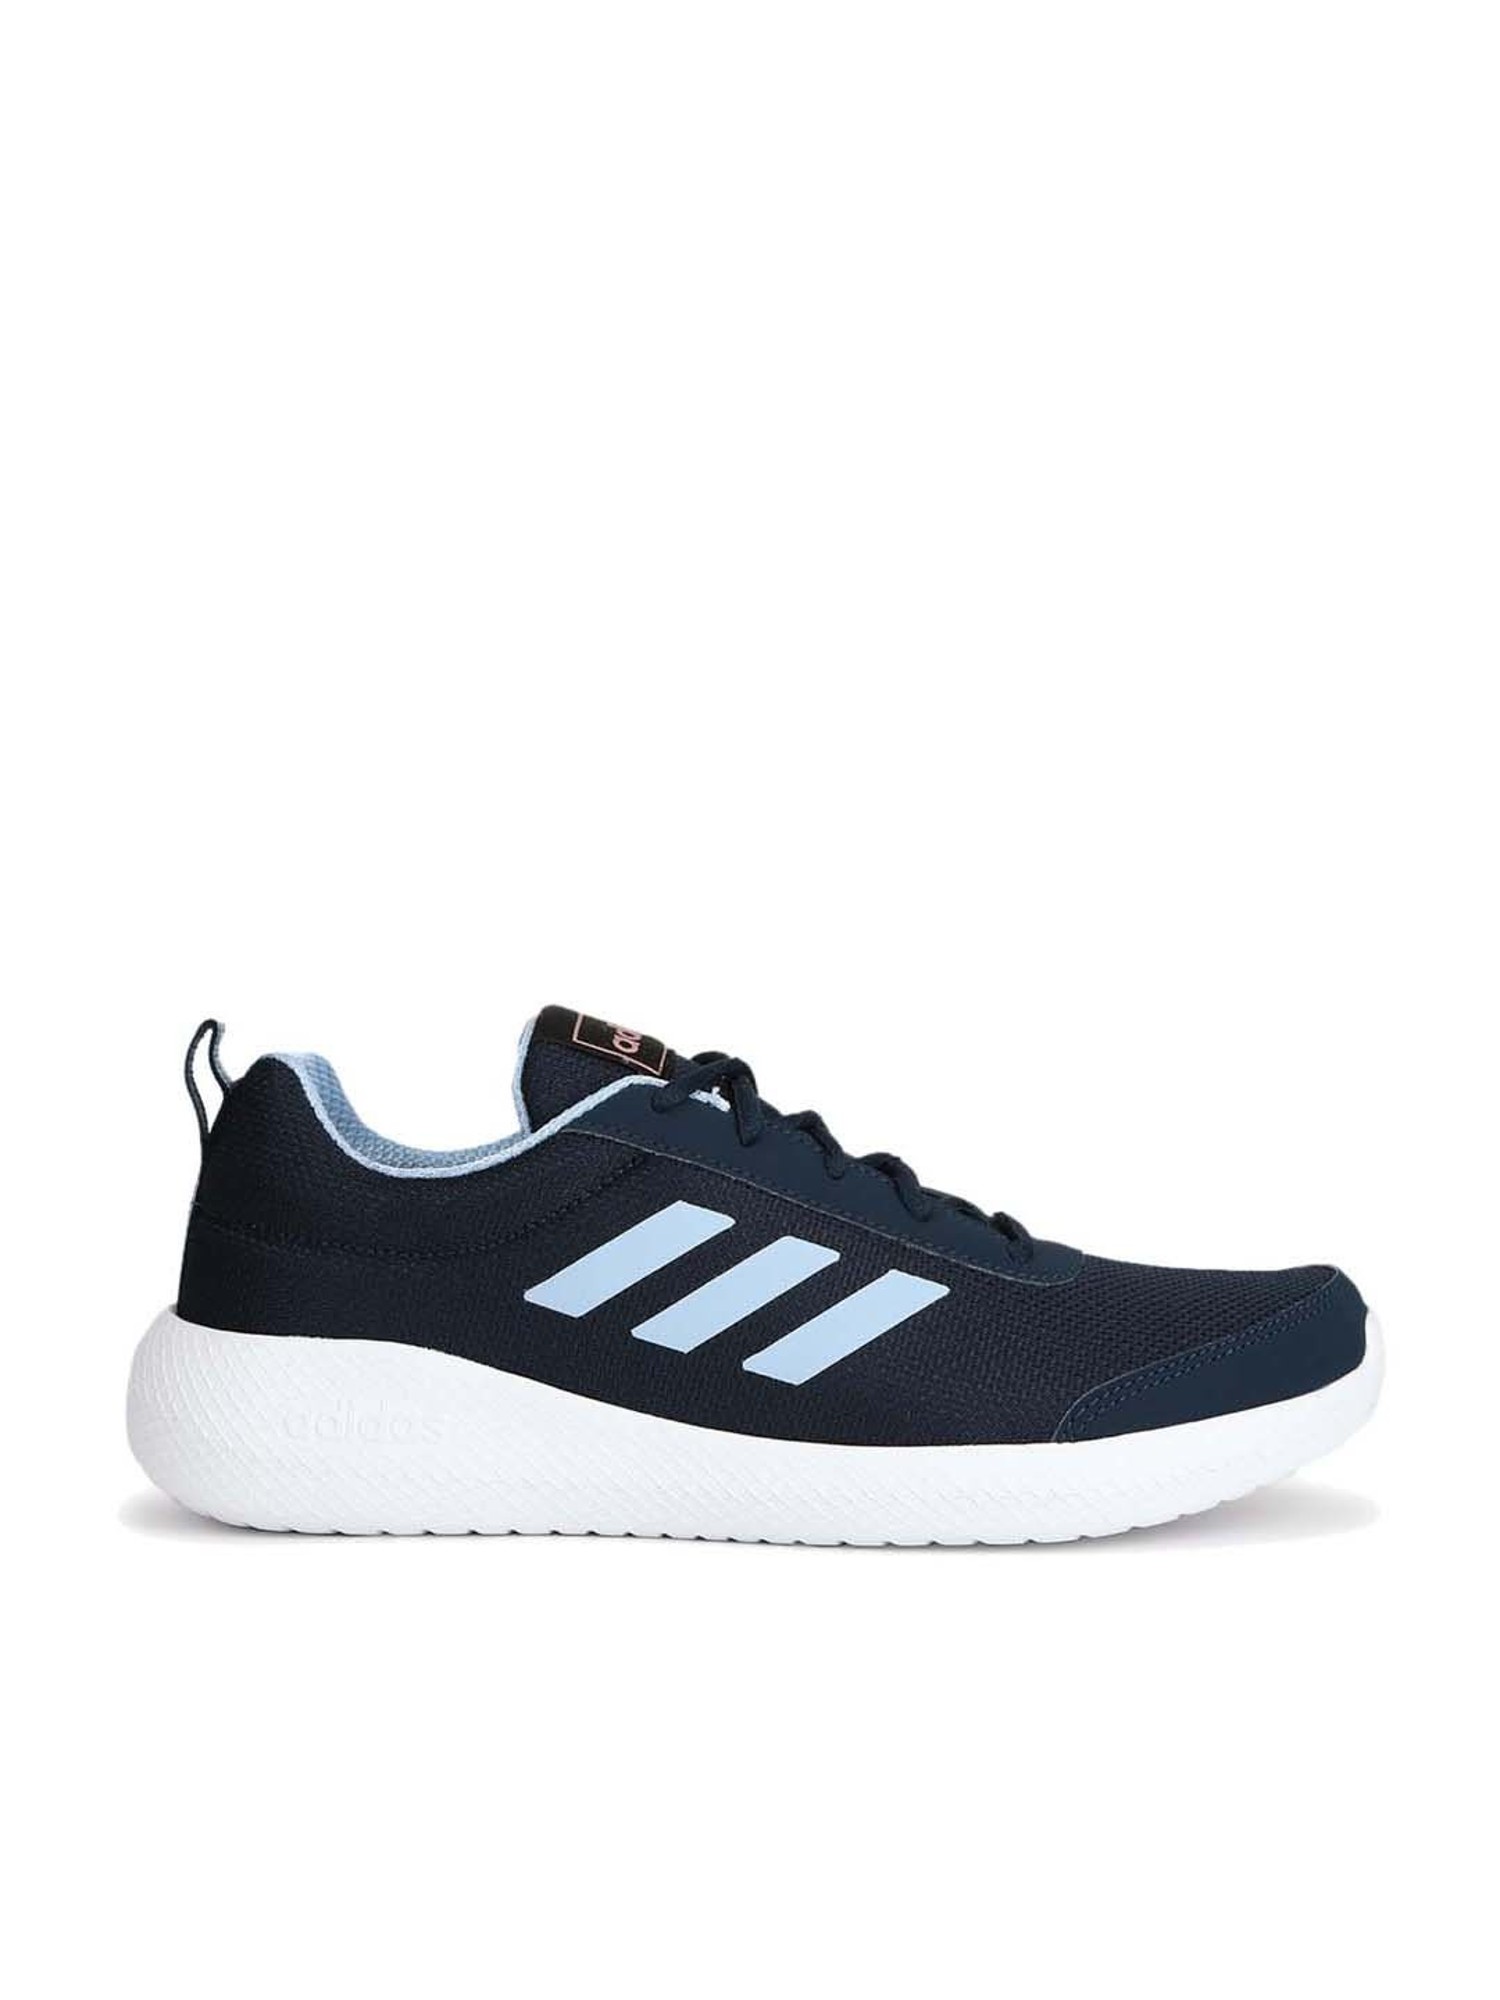 Buy Adidas Classigy Peacoat Navy Running Shoes for Women at Best Price @ Tata CLiQ